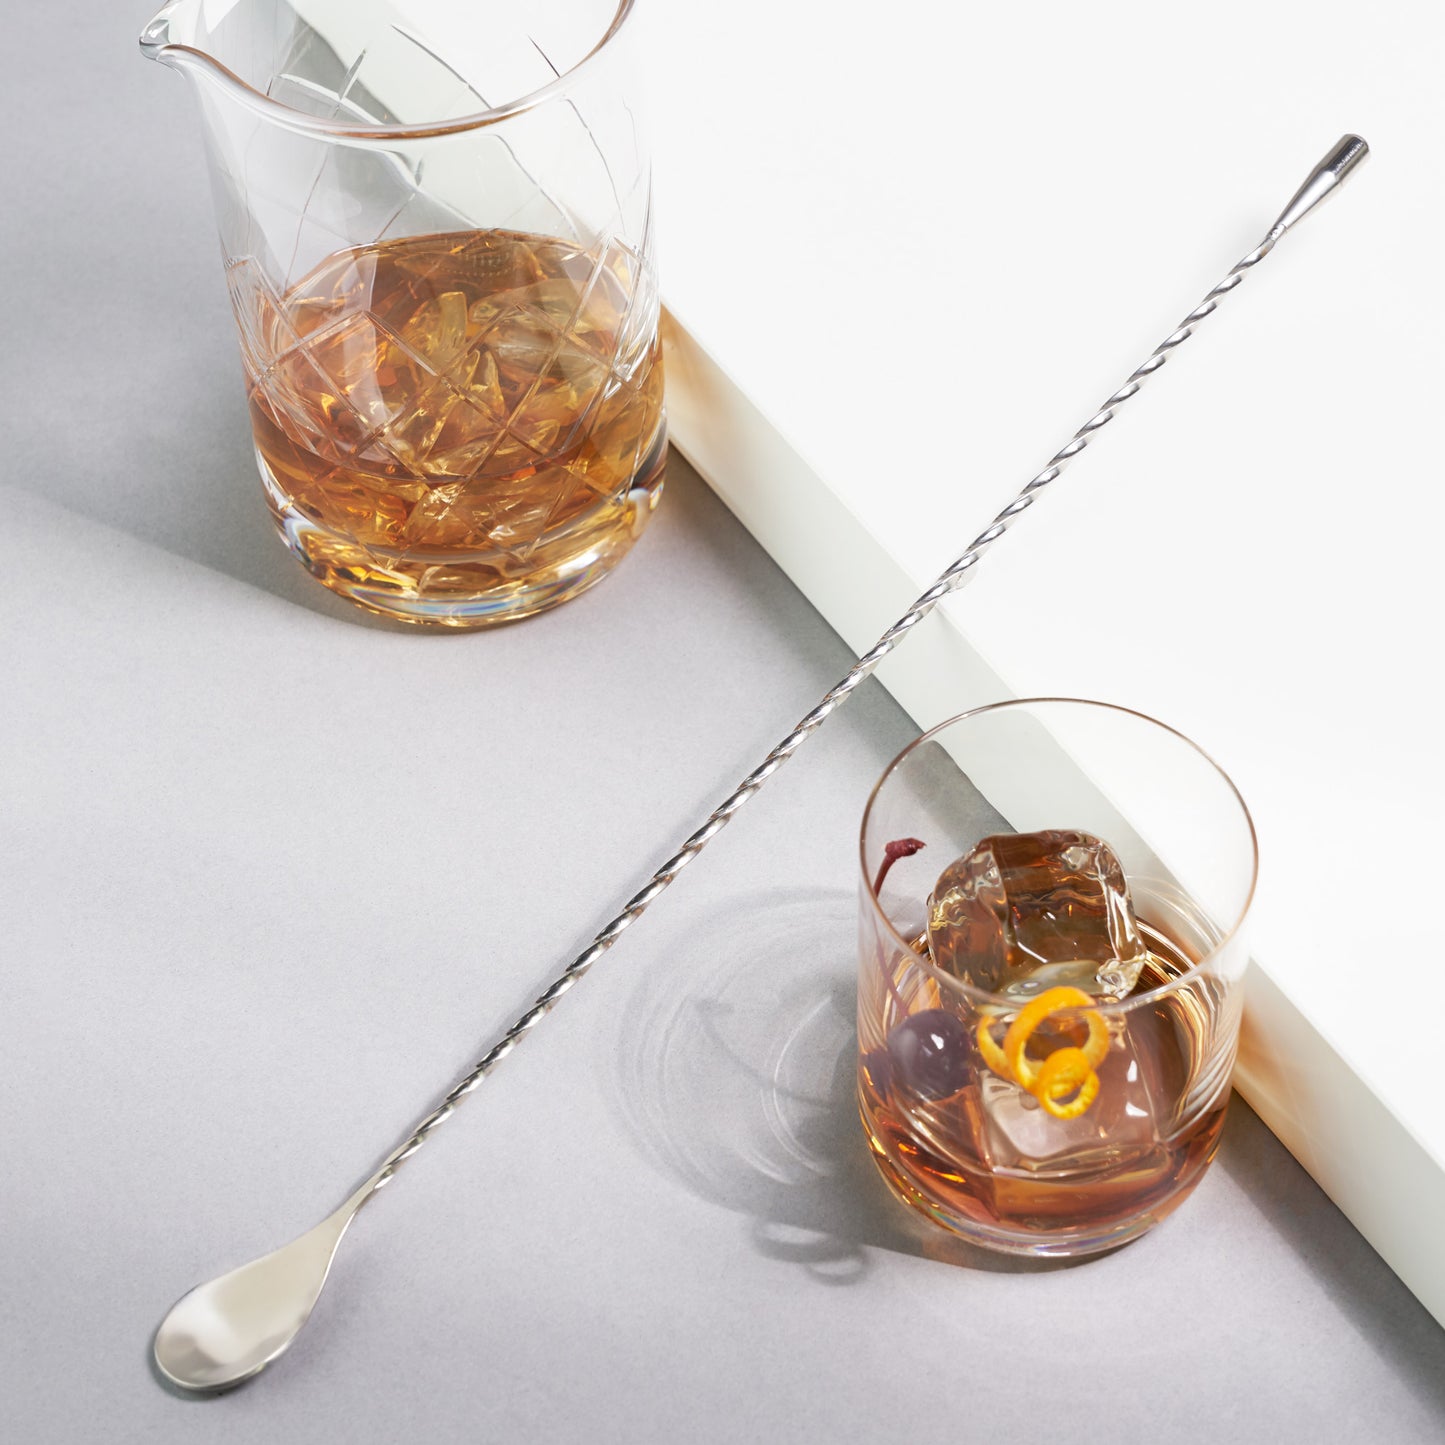 Weighted Bar Spoon -Stainless Steel